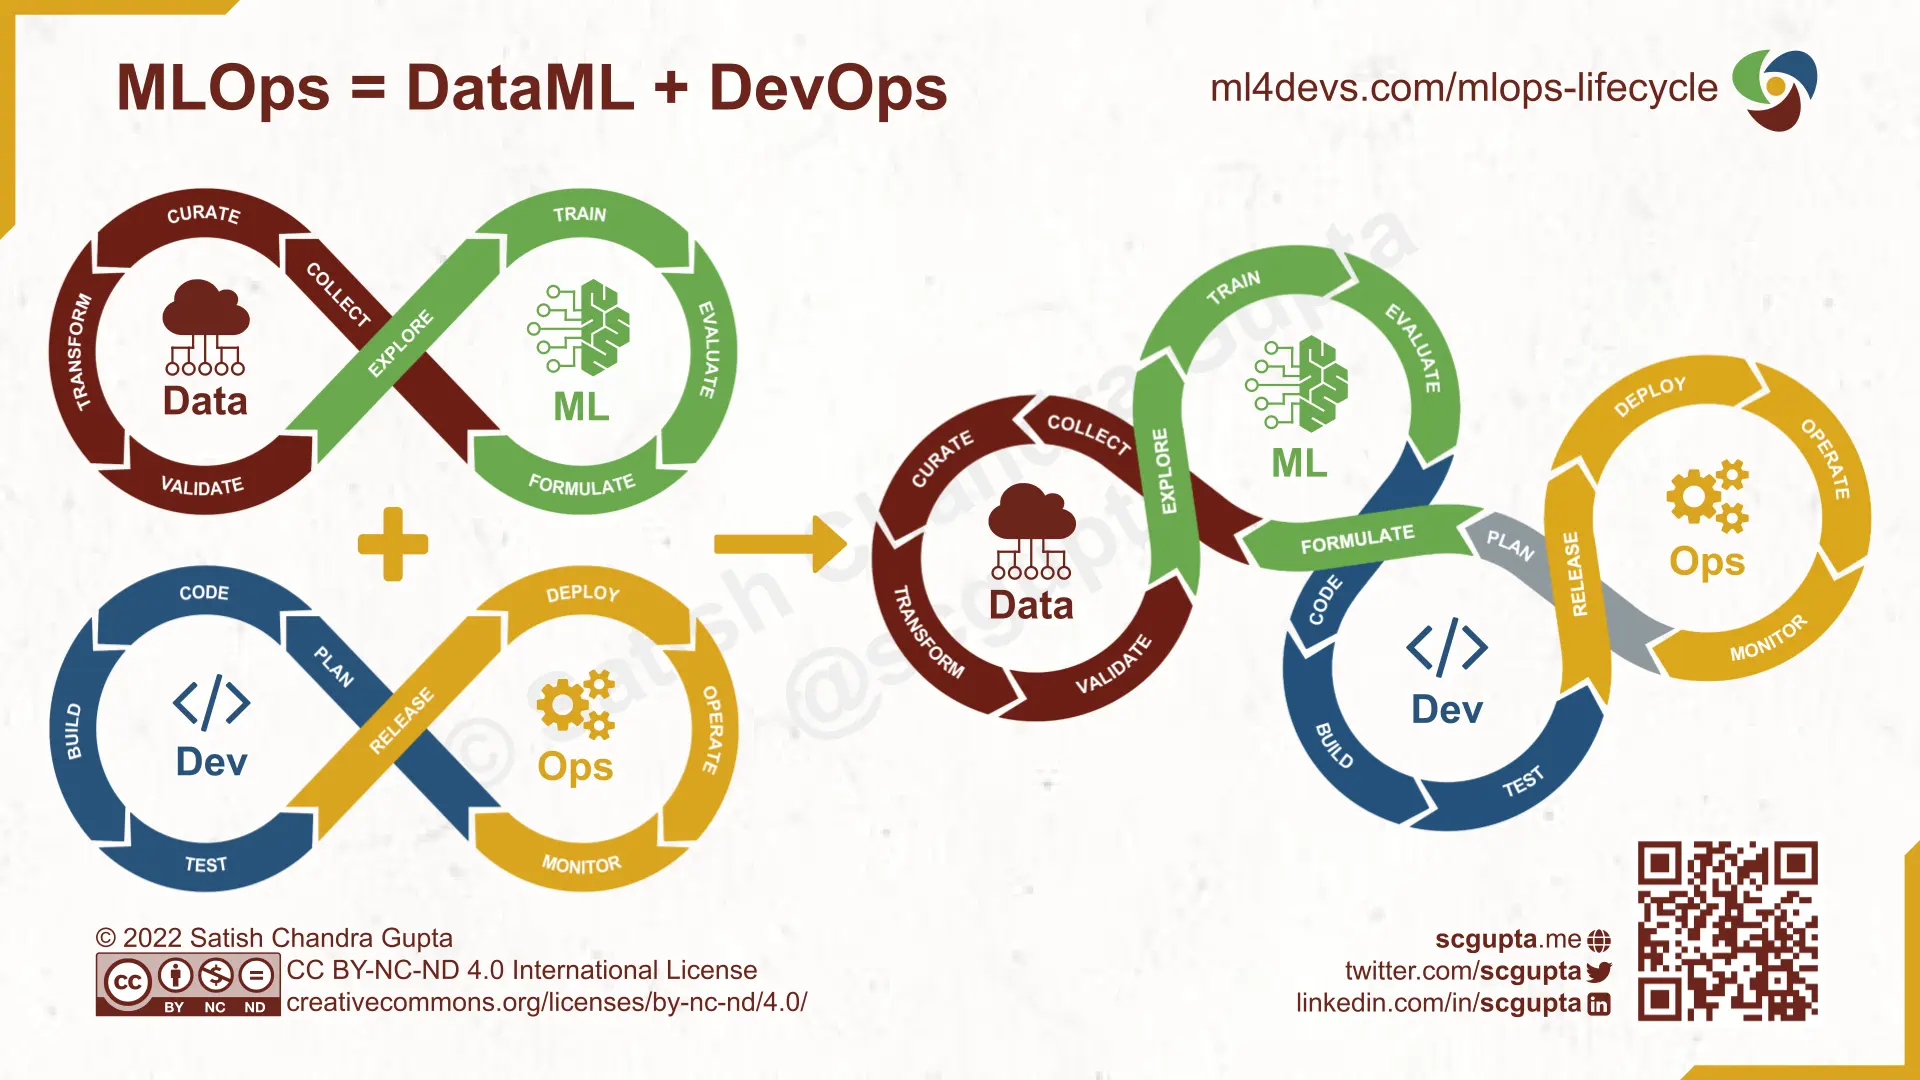 MLOps Lifecycle: Model Development and Software Development need to stitch together into unified Machine Learning Life Cycle